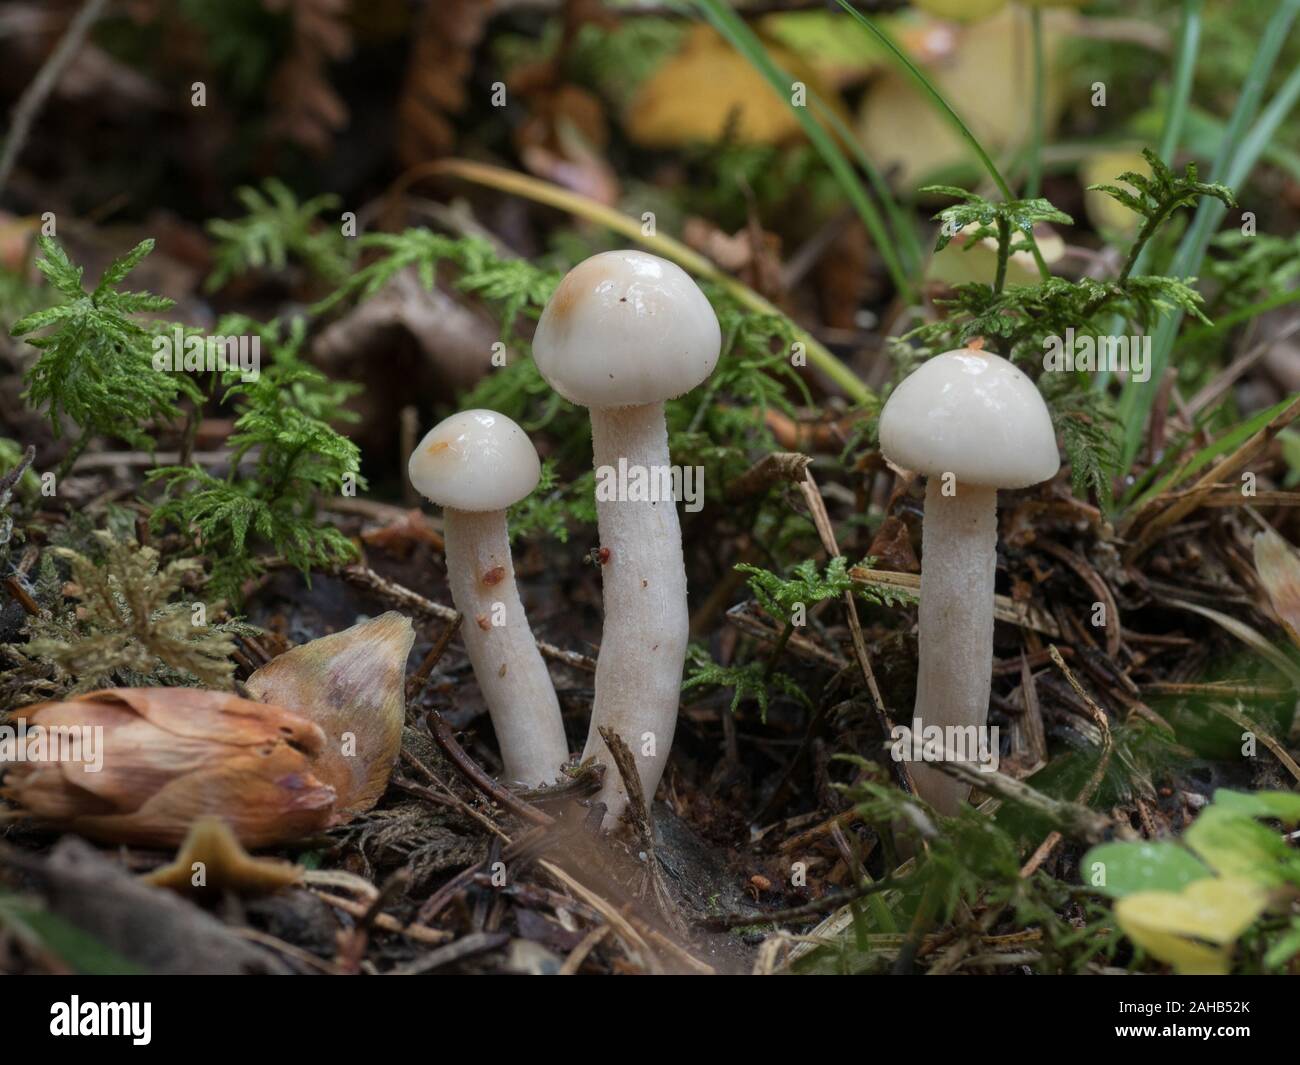 Hygrophorus eburneus, commonly known as the ivory waxy cap or the cowboy's handkerchief growing in Görvälns naturreservat, Sweden. Stock Photo